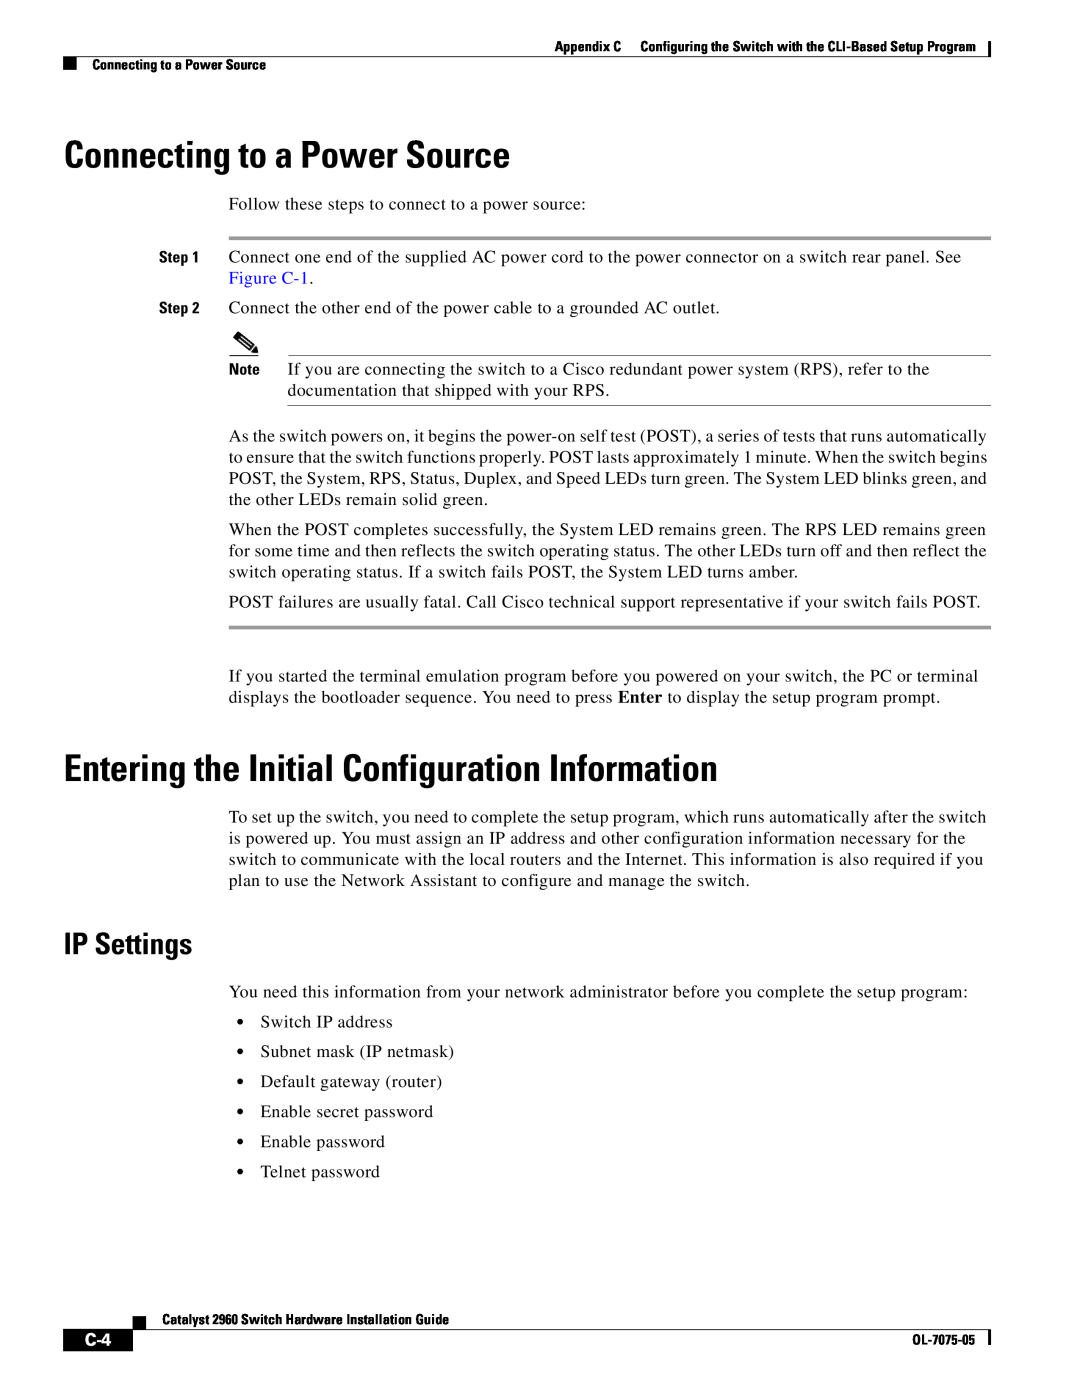 Cisco Systems 2960 specifications Connecting to a Power Source, Entering the Initial Configuration Information, IP Settings 